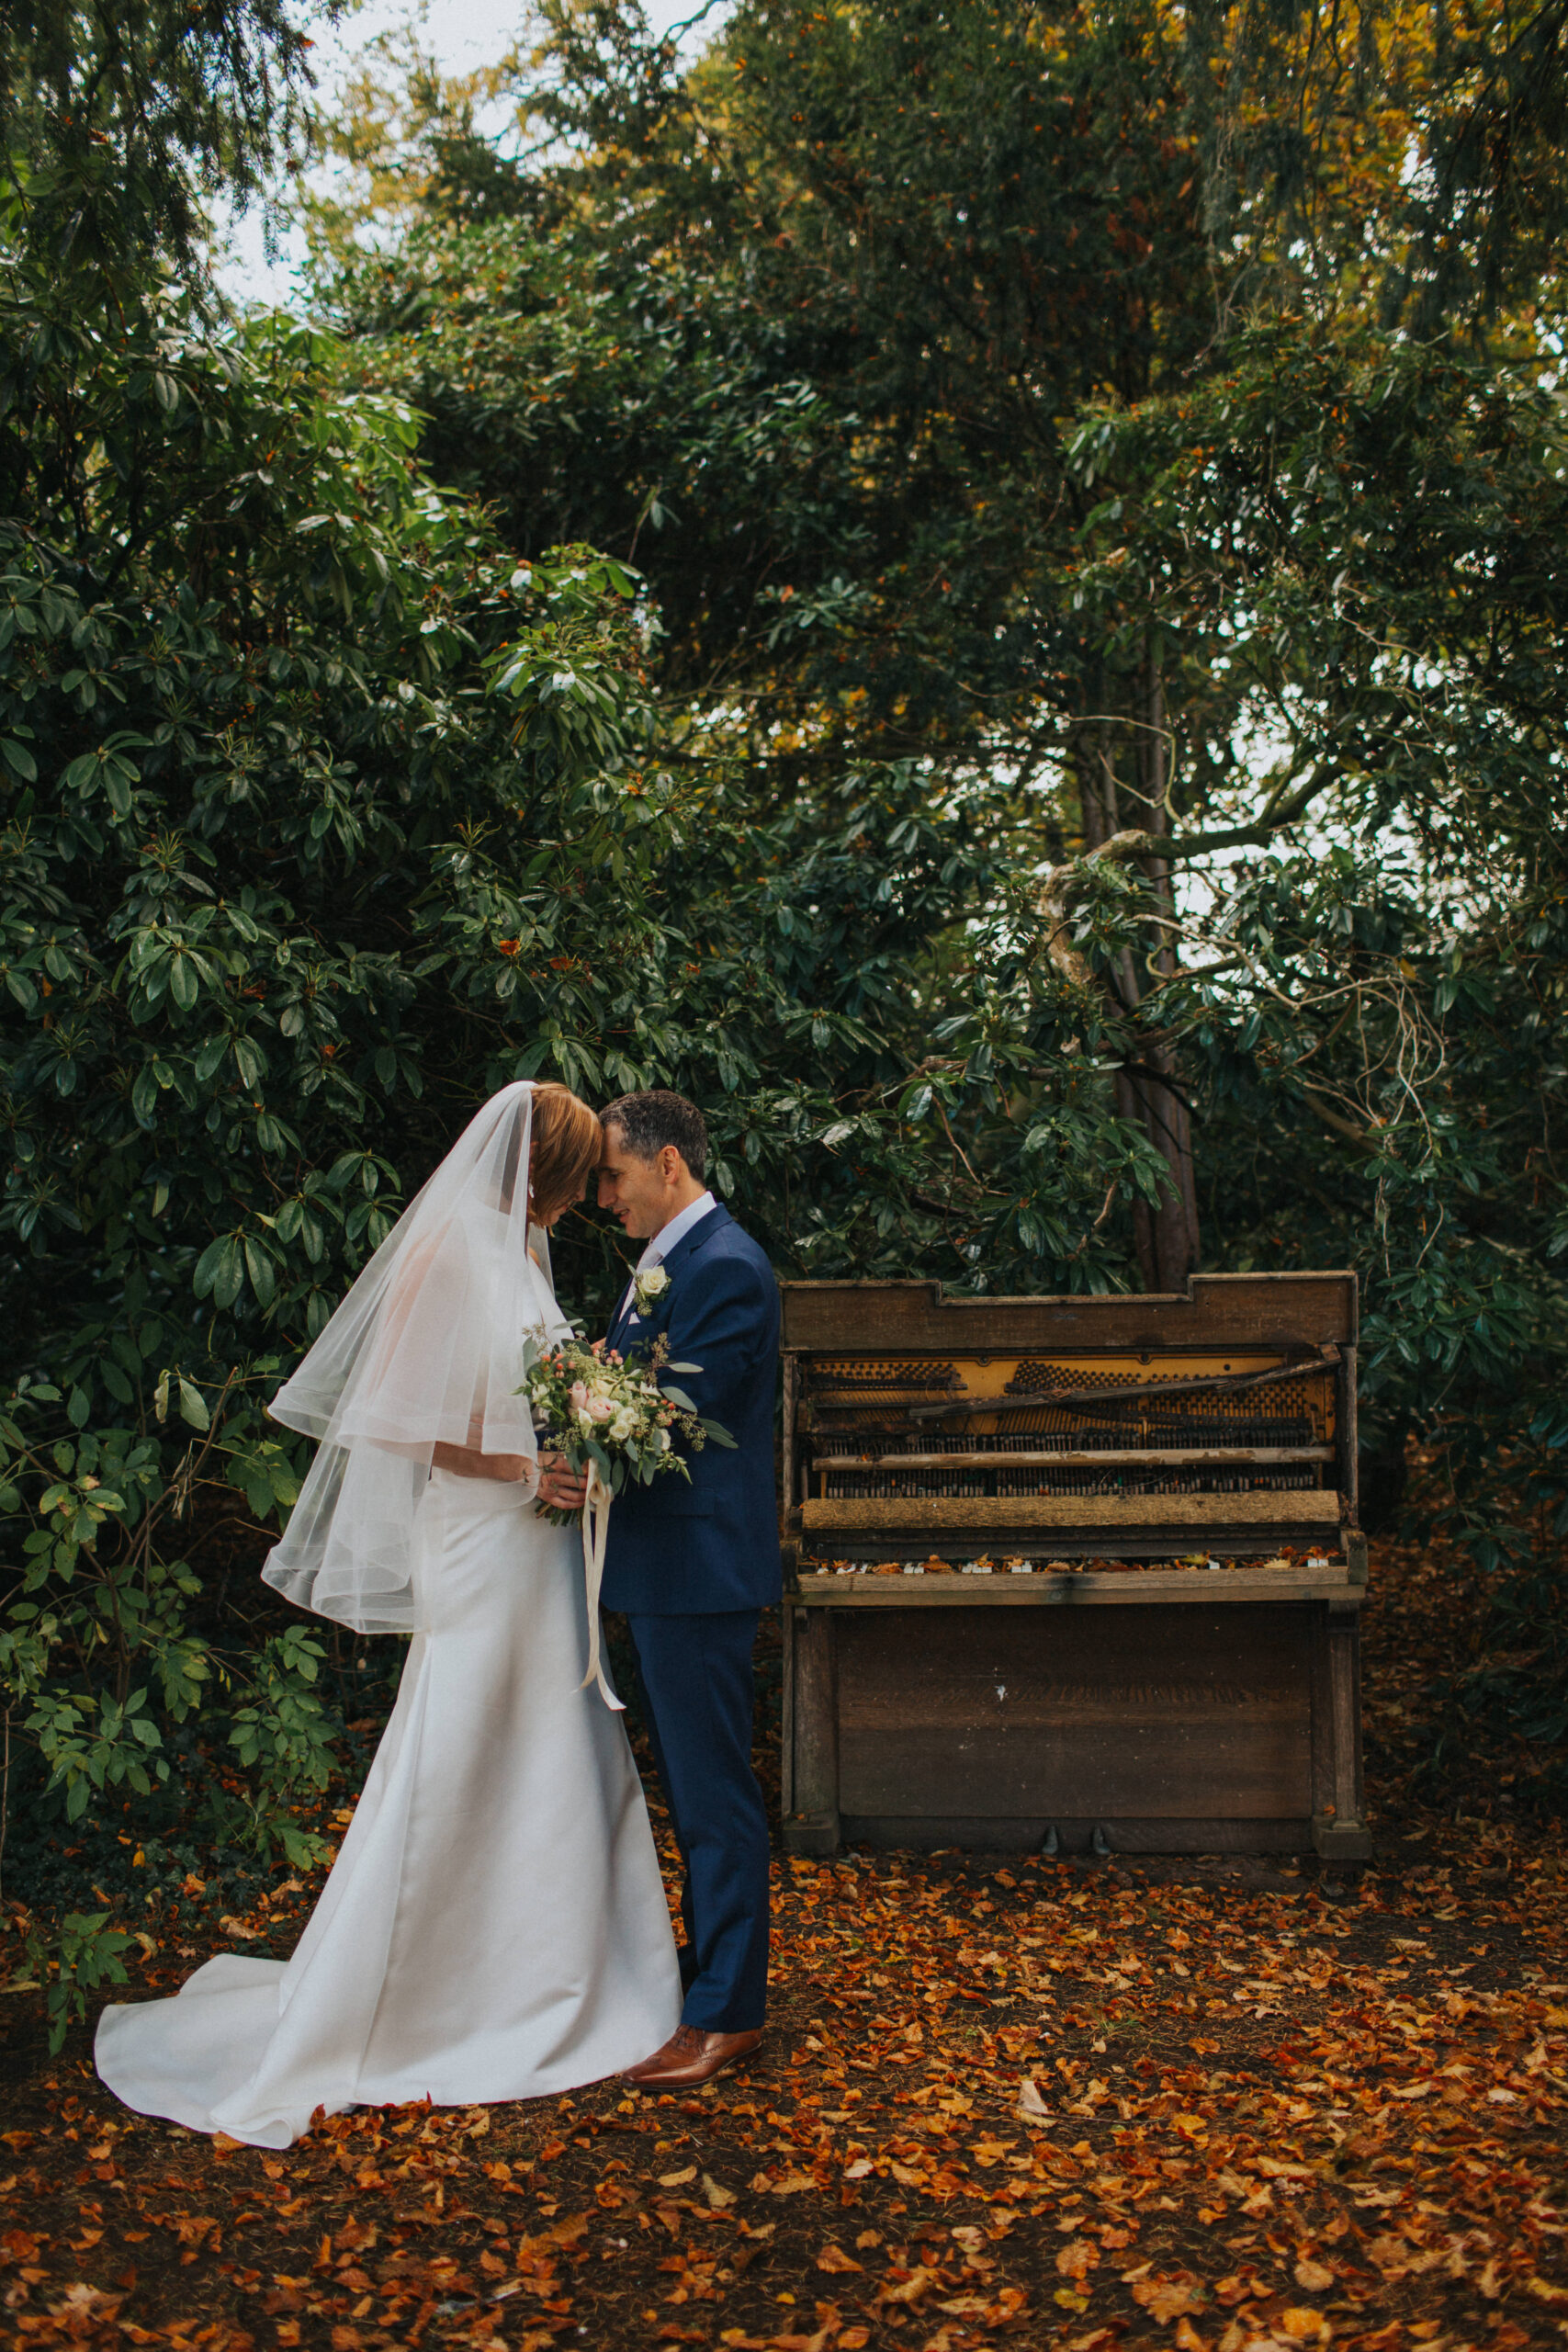 Autumnal love story told through the lens at the Shropshire venue